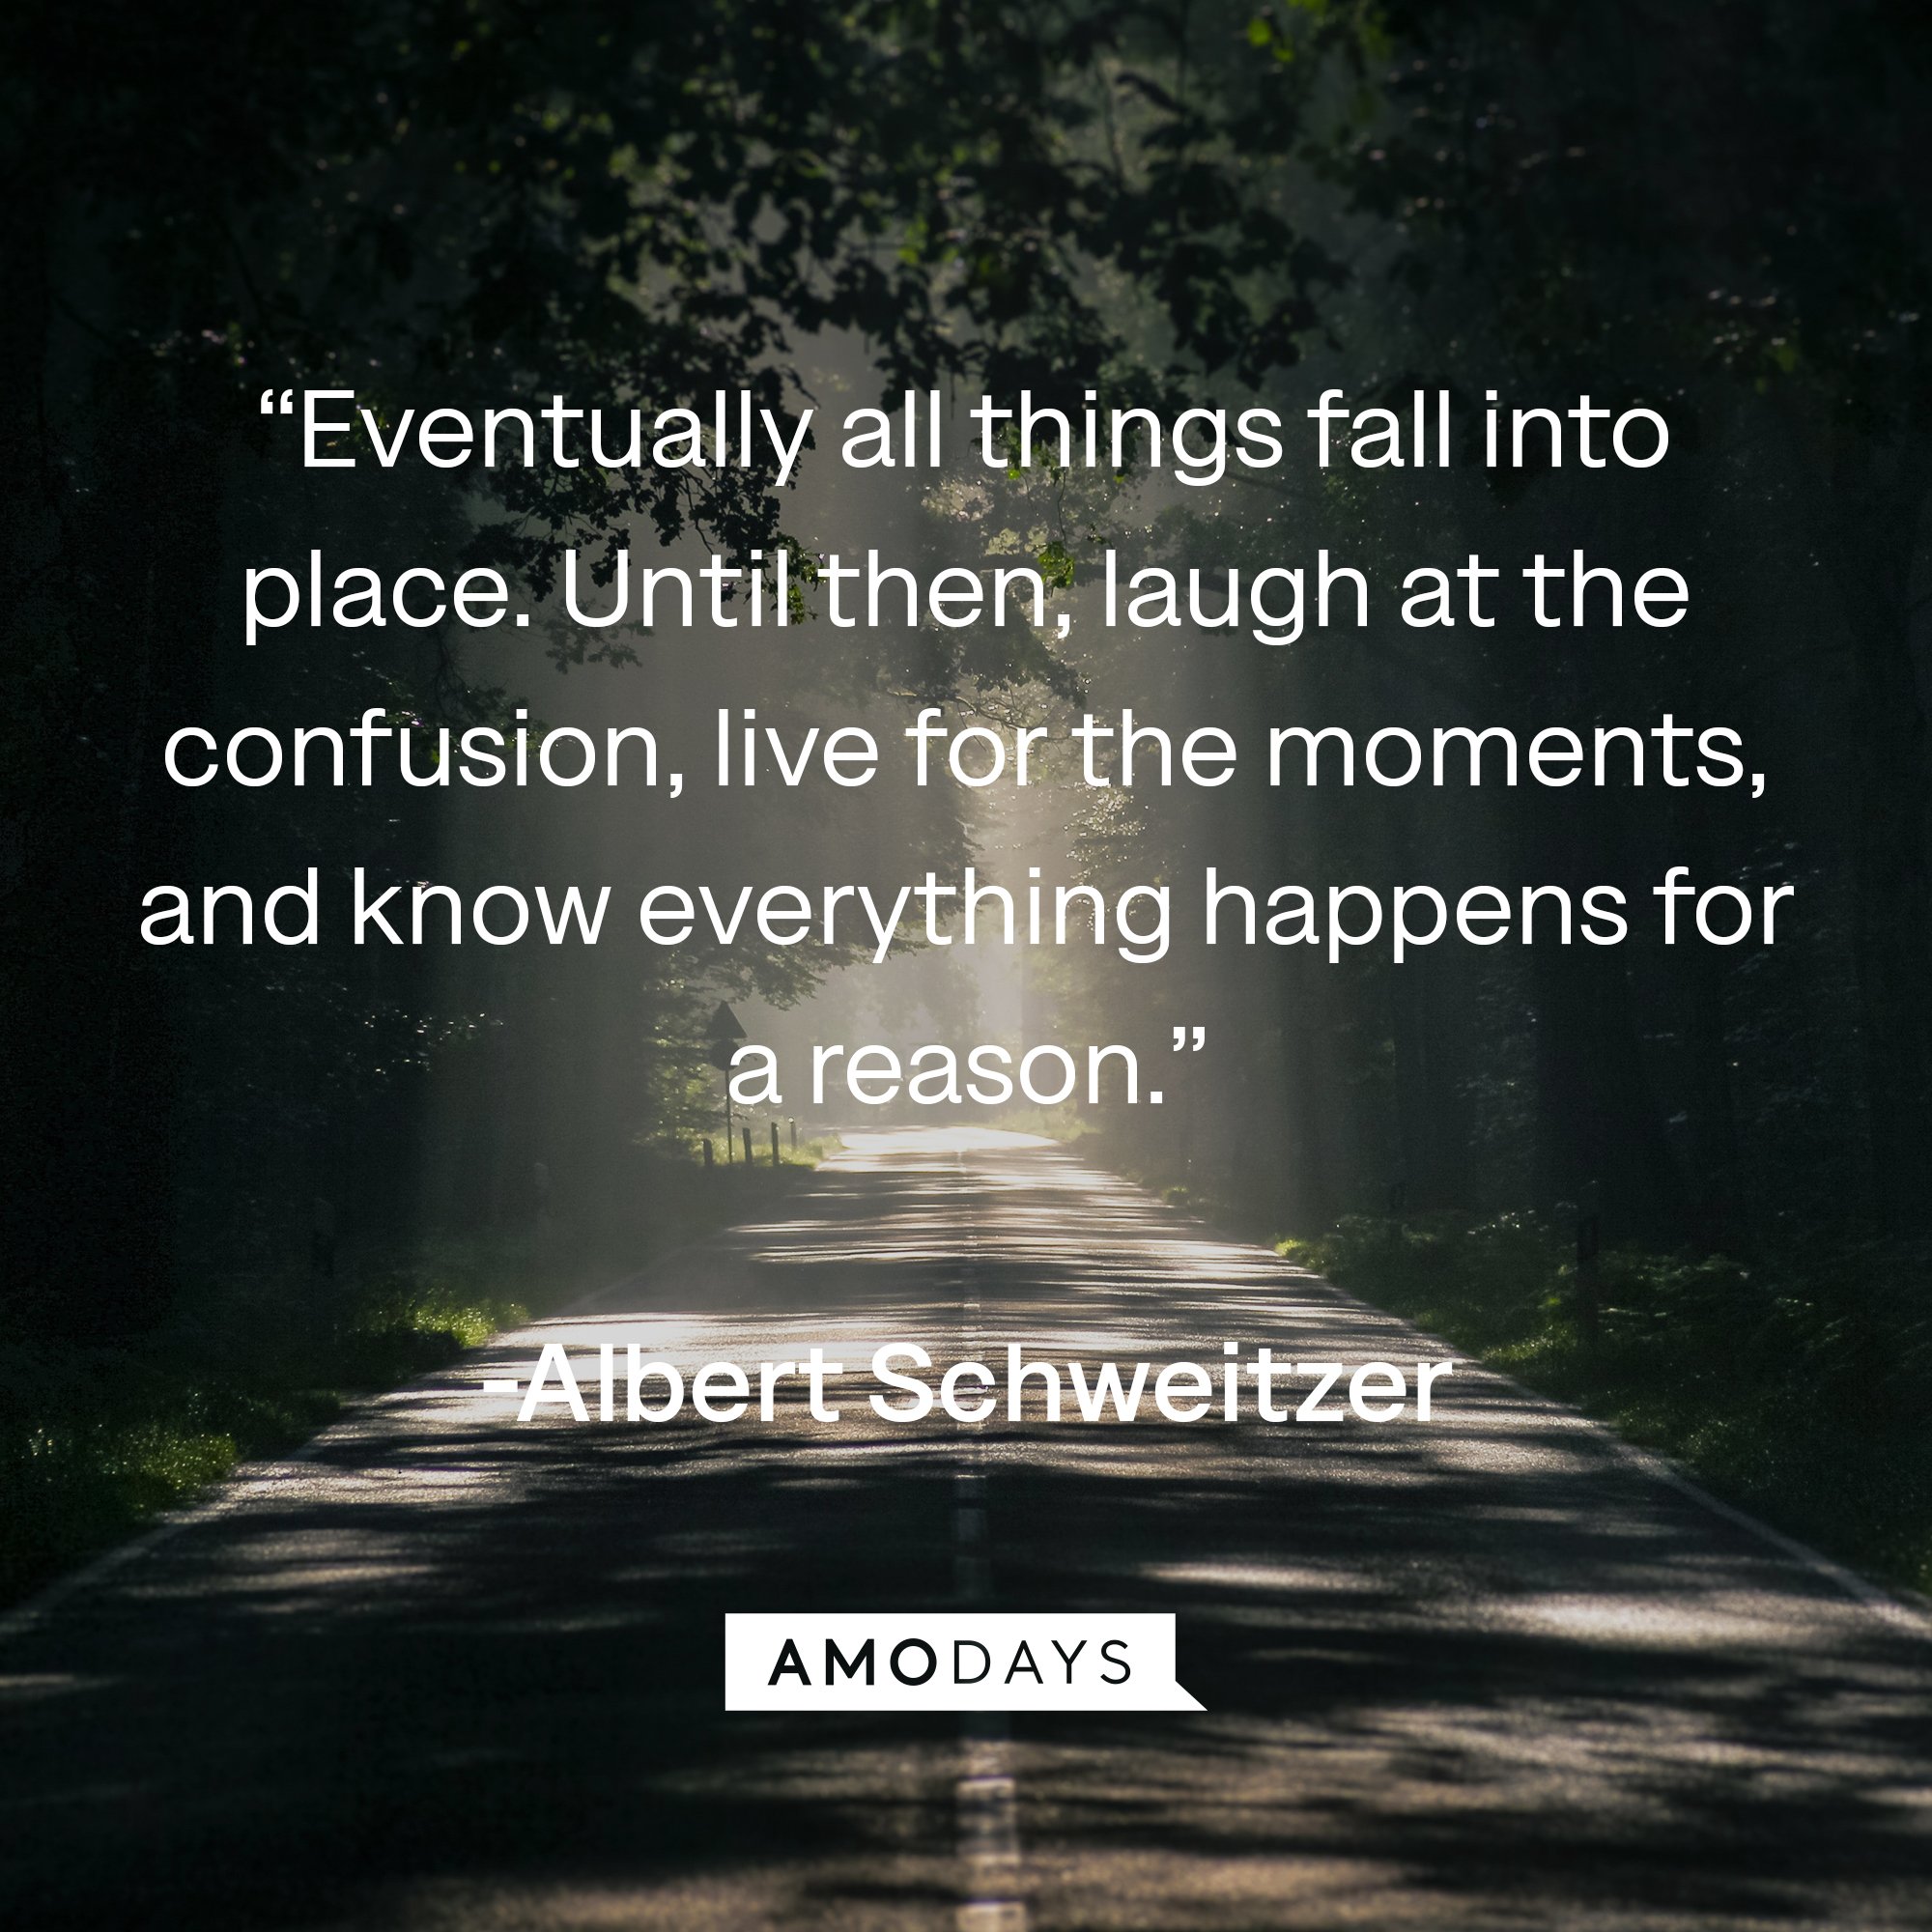  Albert Schweitzer's quote: “Eventually all things fall into place. Until then, laugh at the confusion, live for the moments, and know everything happen for a reason.”| Image: AmoDays